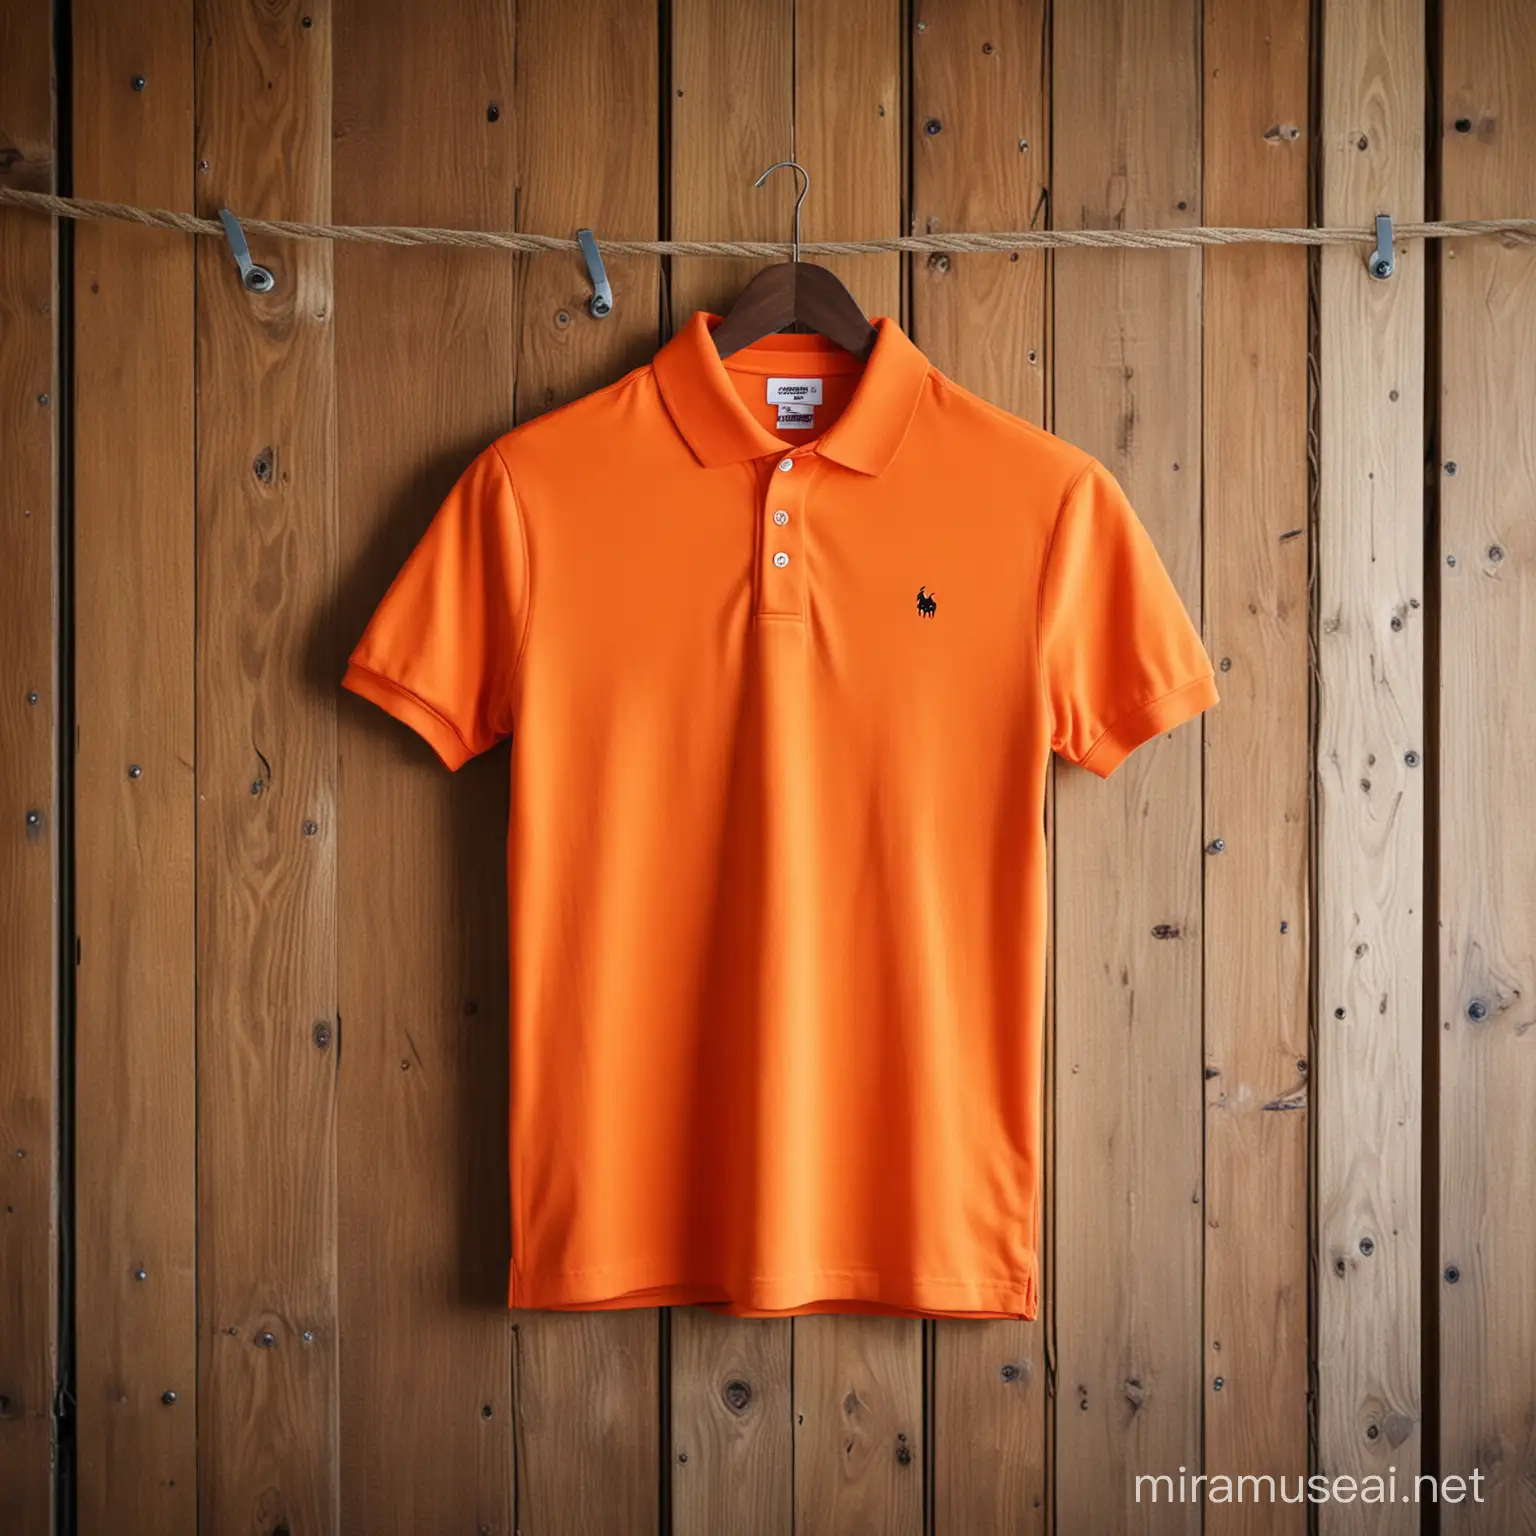 orange polo t shirt hanging on wooden wall with nail